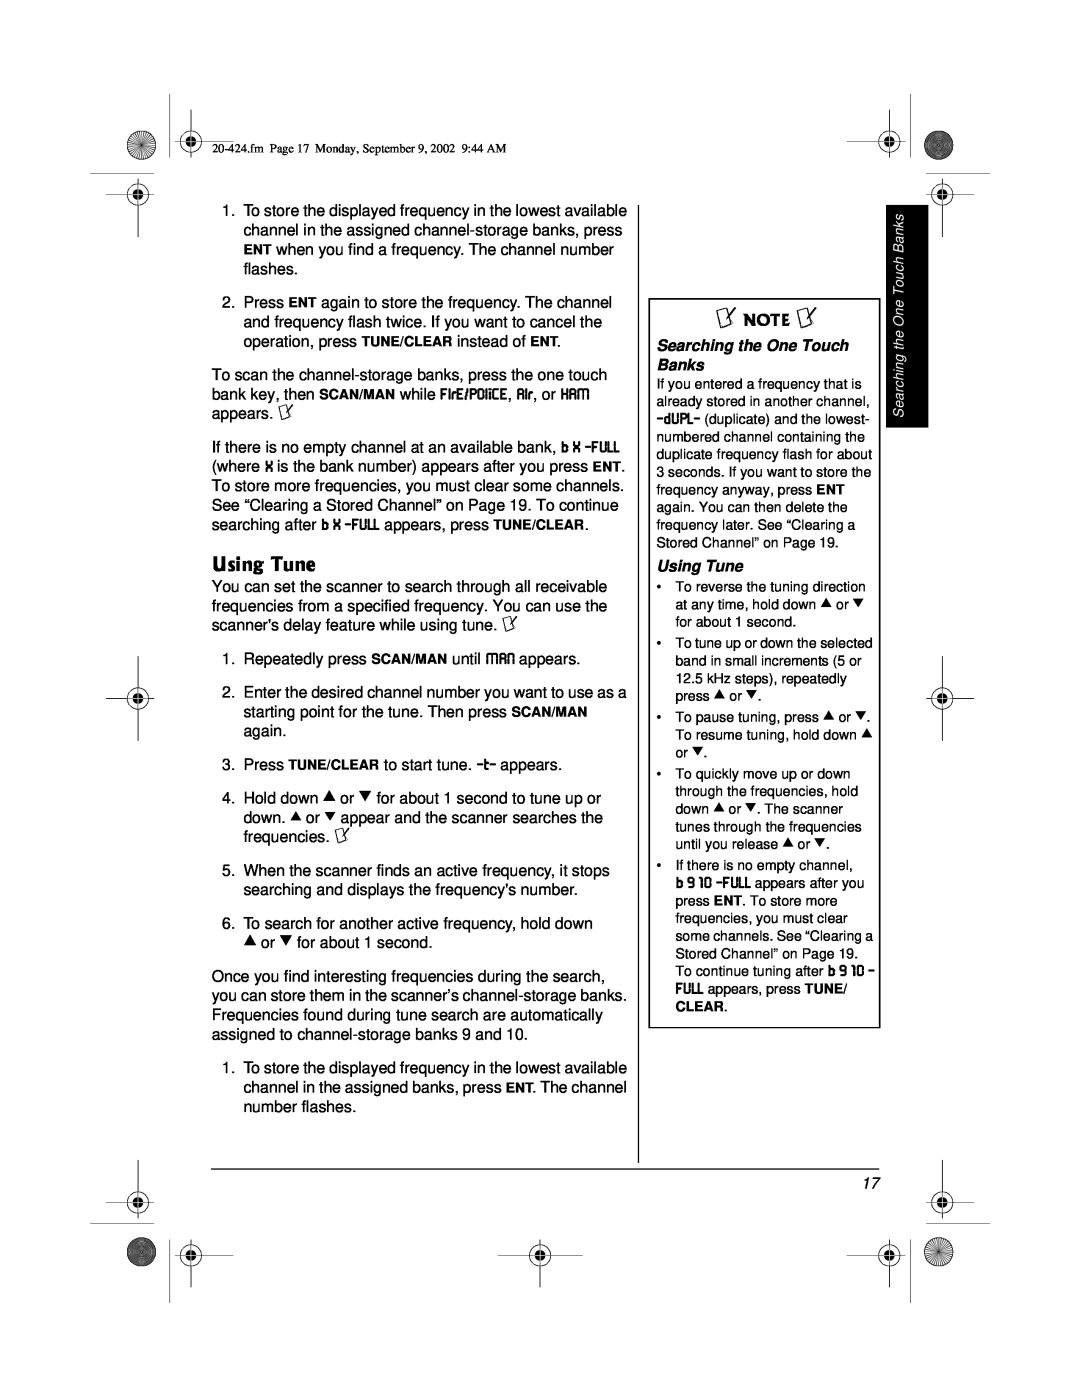 Radio Shack PRO-2018 manual 7UKPI6WPG, Using Tune, Searching the One Touch Banks 